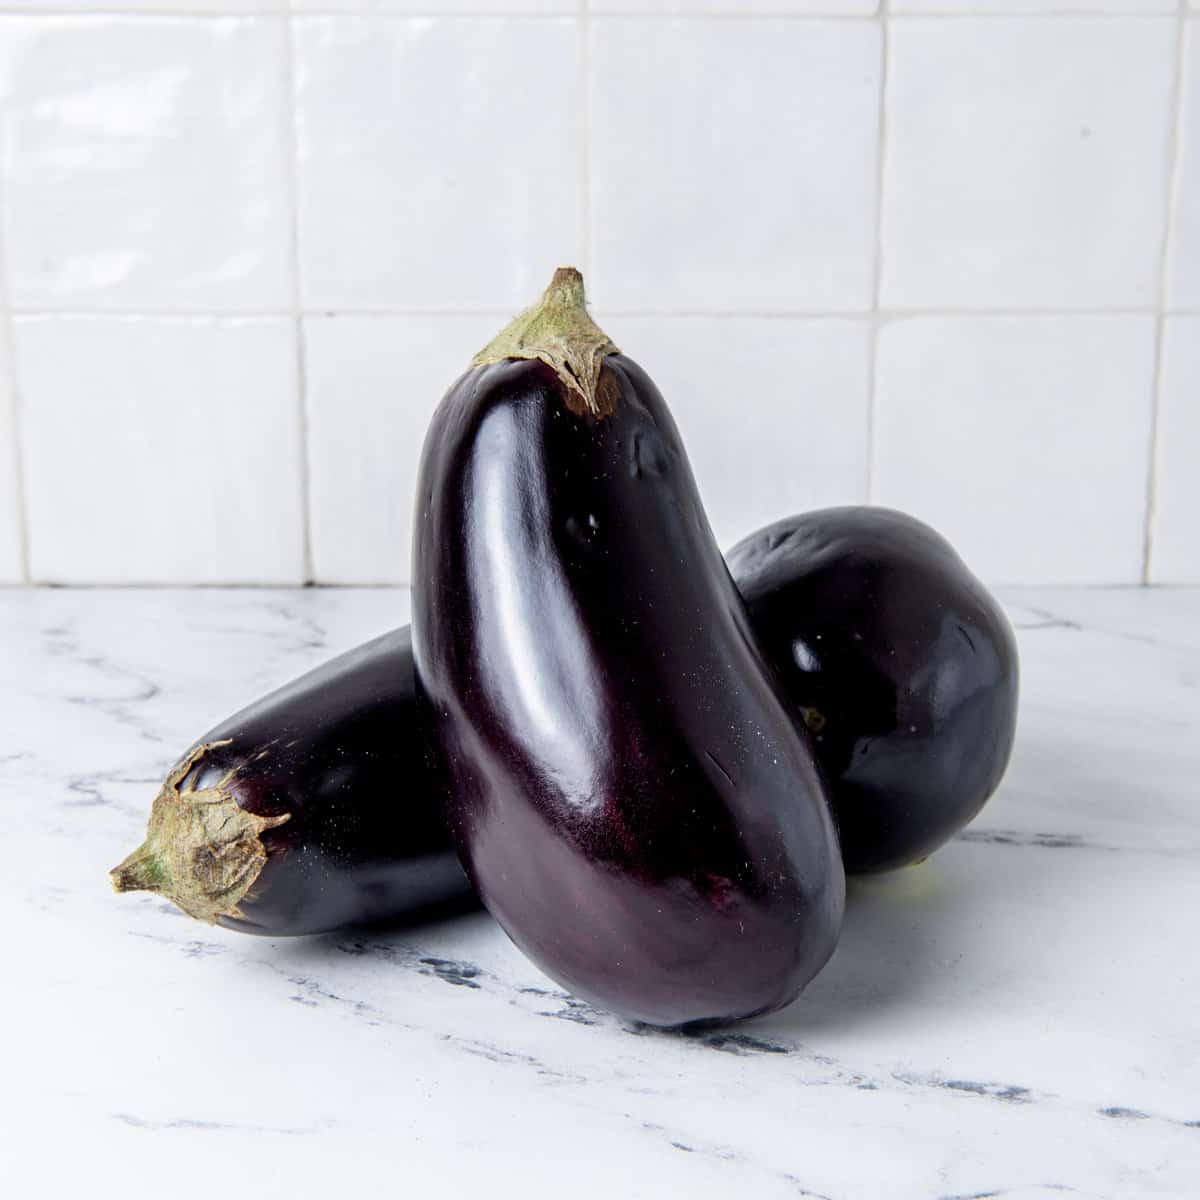 Two eggplant on a counter.